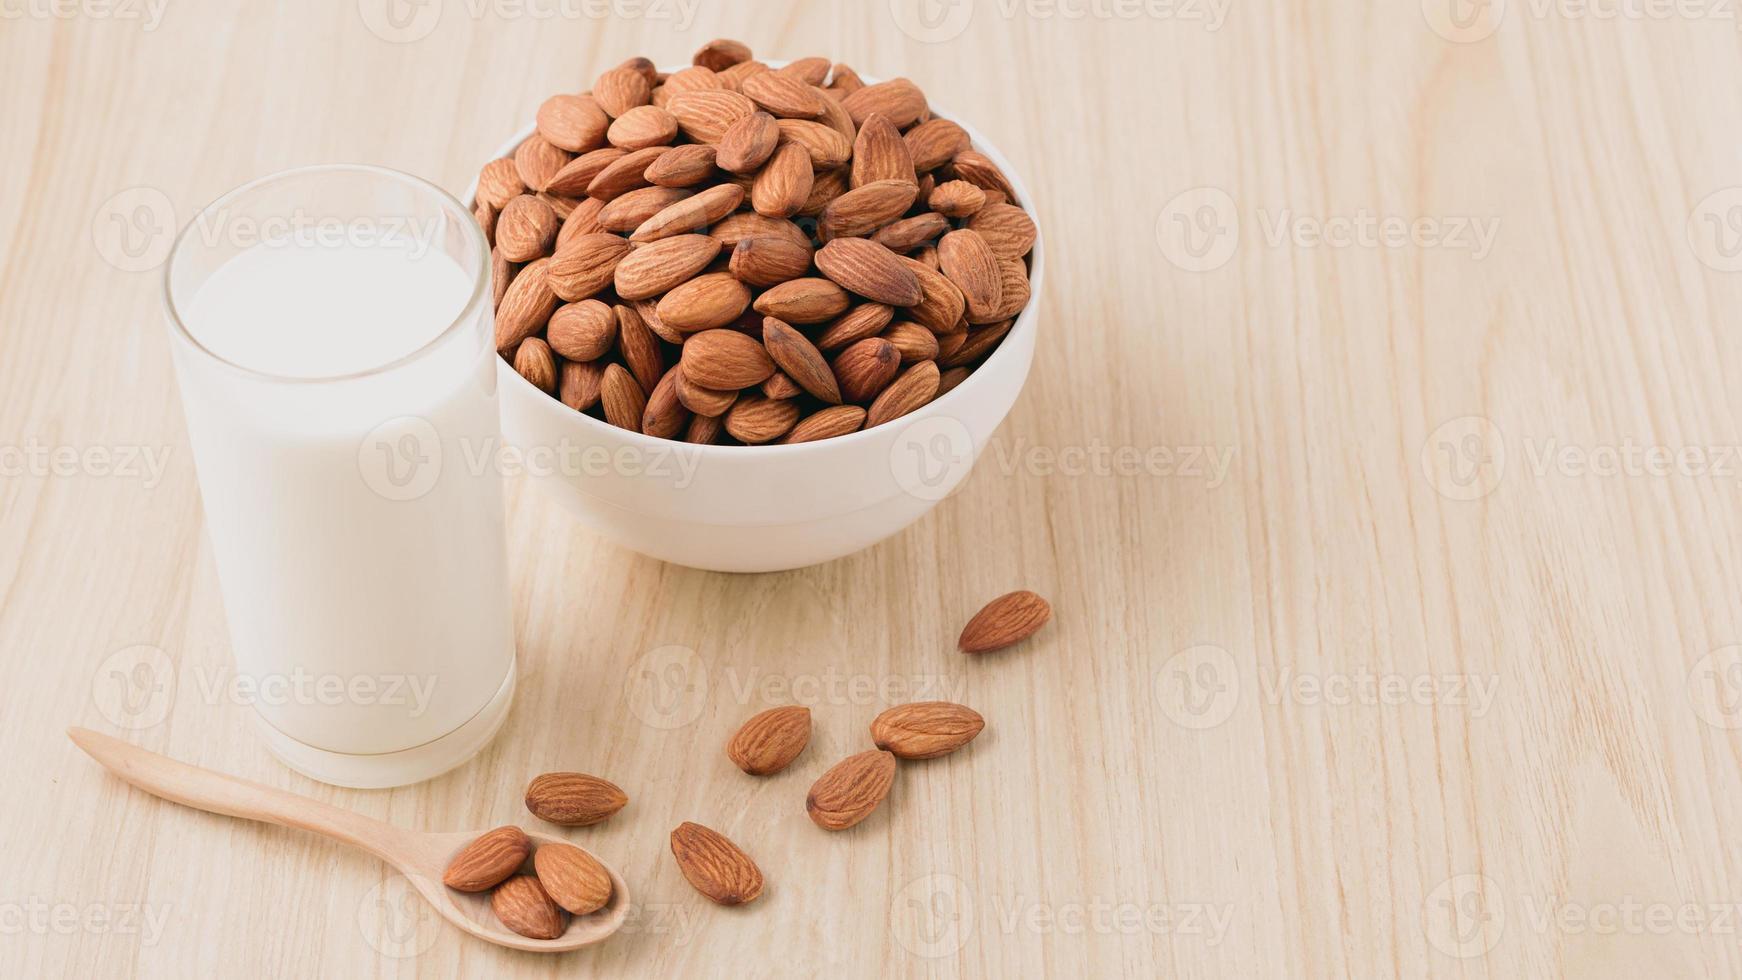 Almond nuts in a white bowl and milk in glass on wood background with nuts in spoon around the bowl.selective focus.front view. copy space. photo